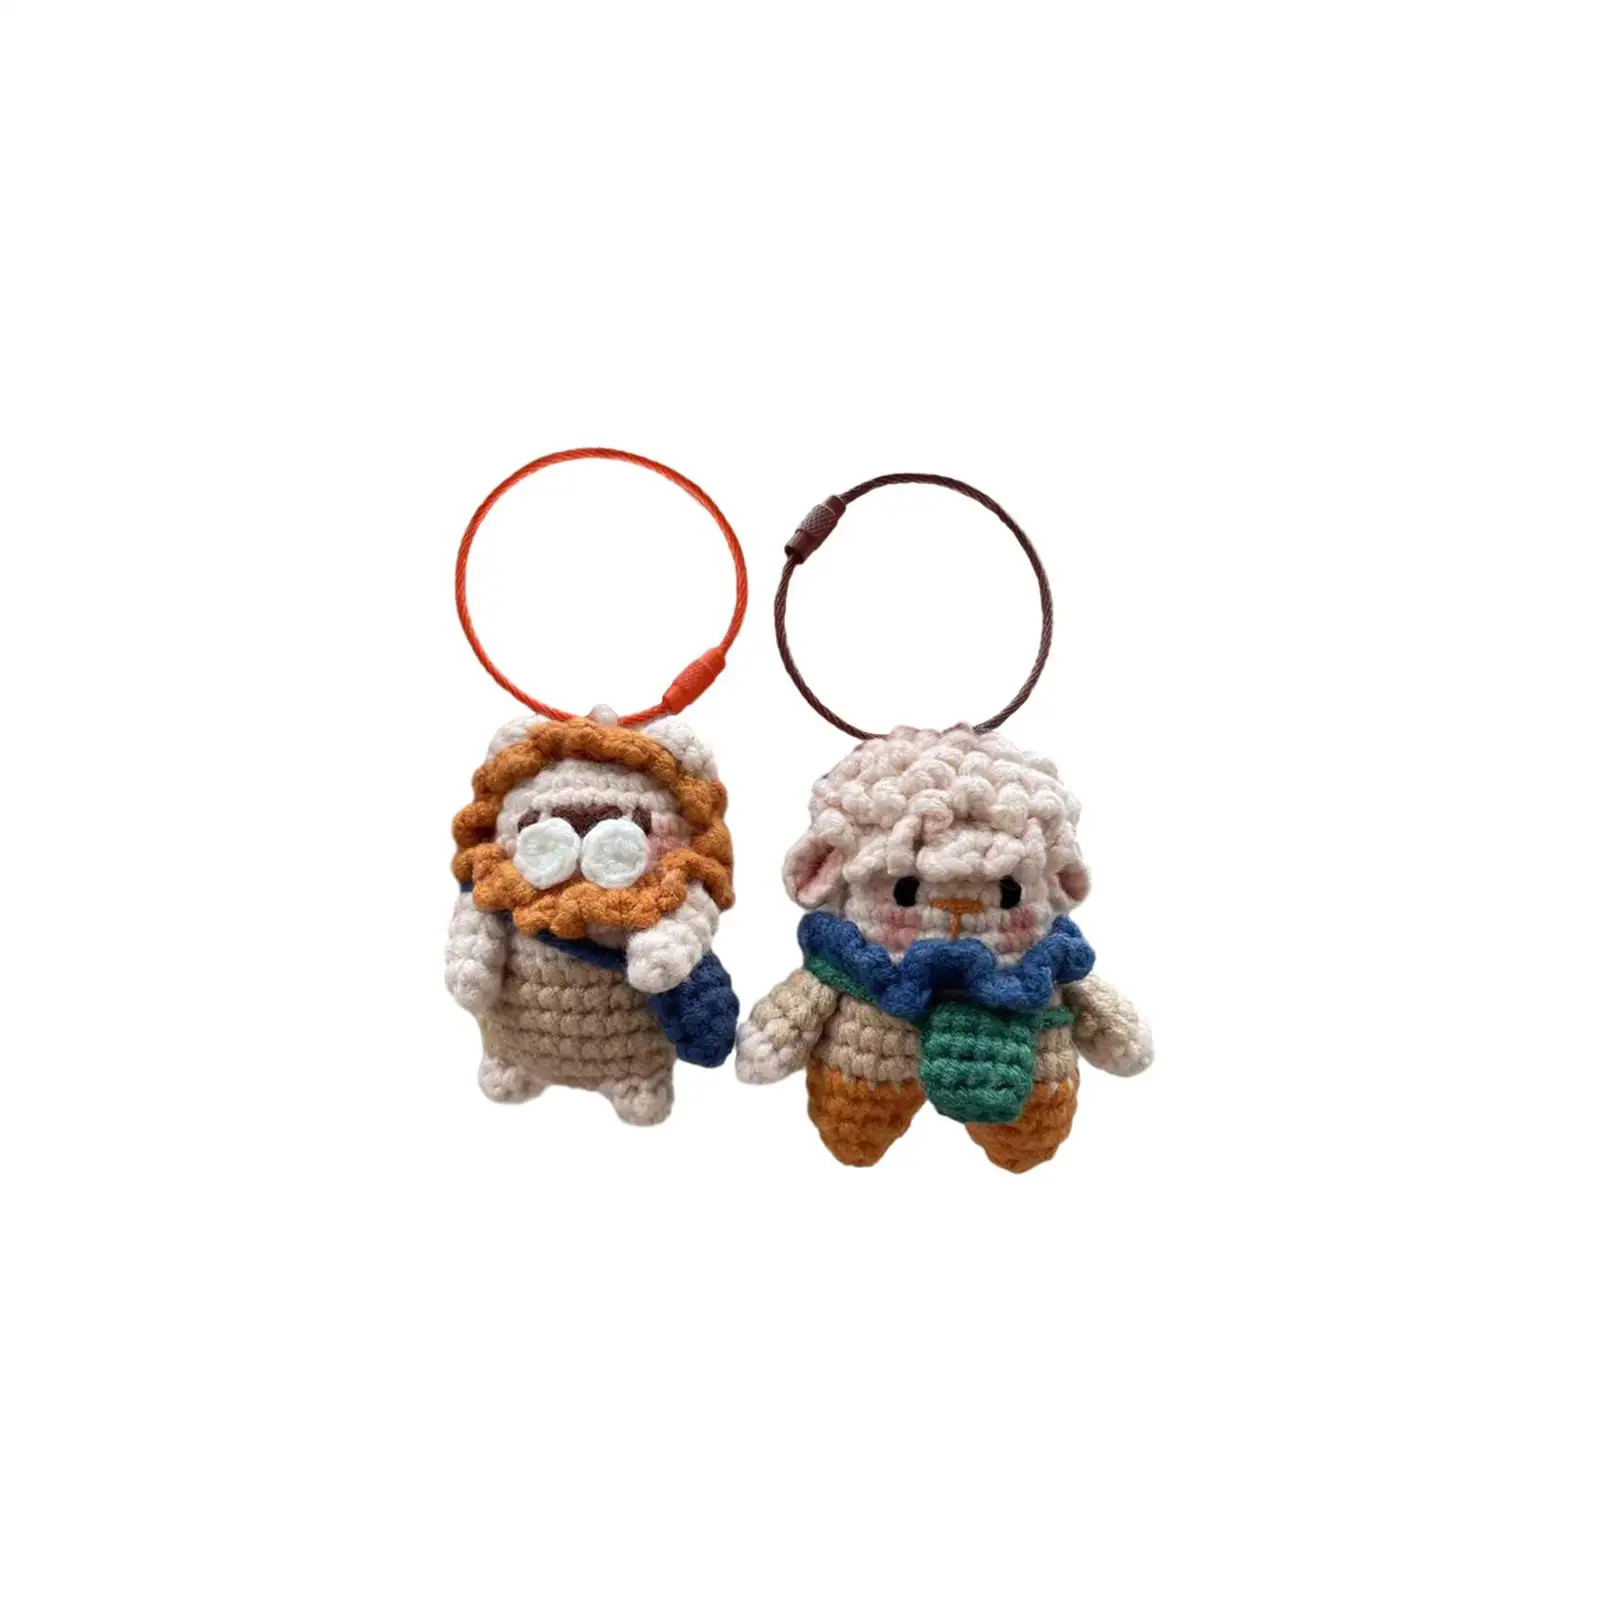 Keychain Pendant Crochet Material Package Crocheting Craft Set Beginners Make Your Own Doll Hanging Ornament Hand Knitting Toy